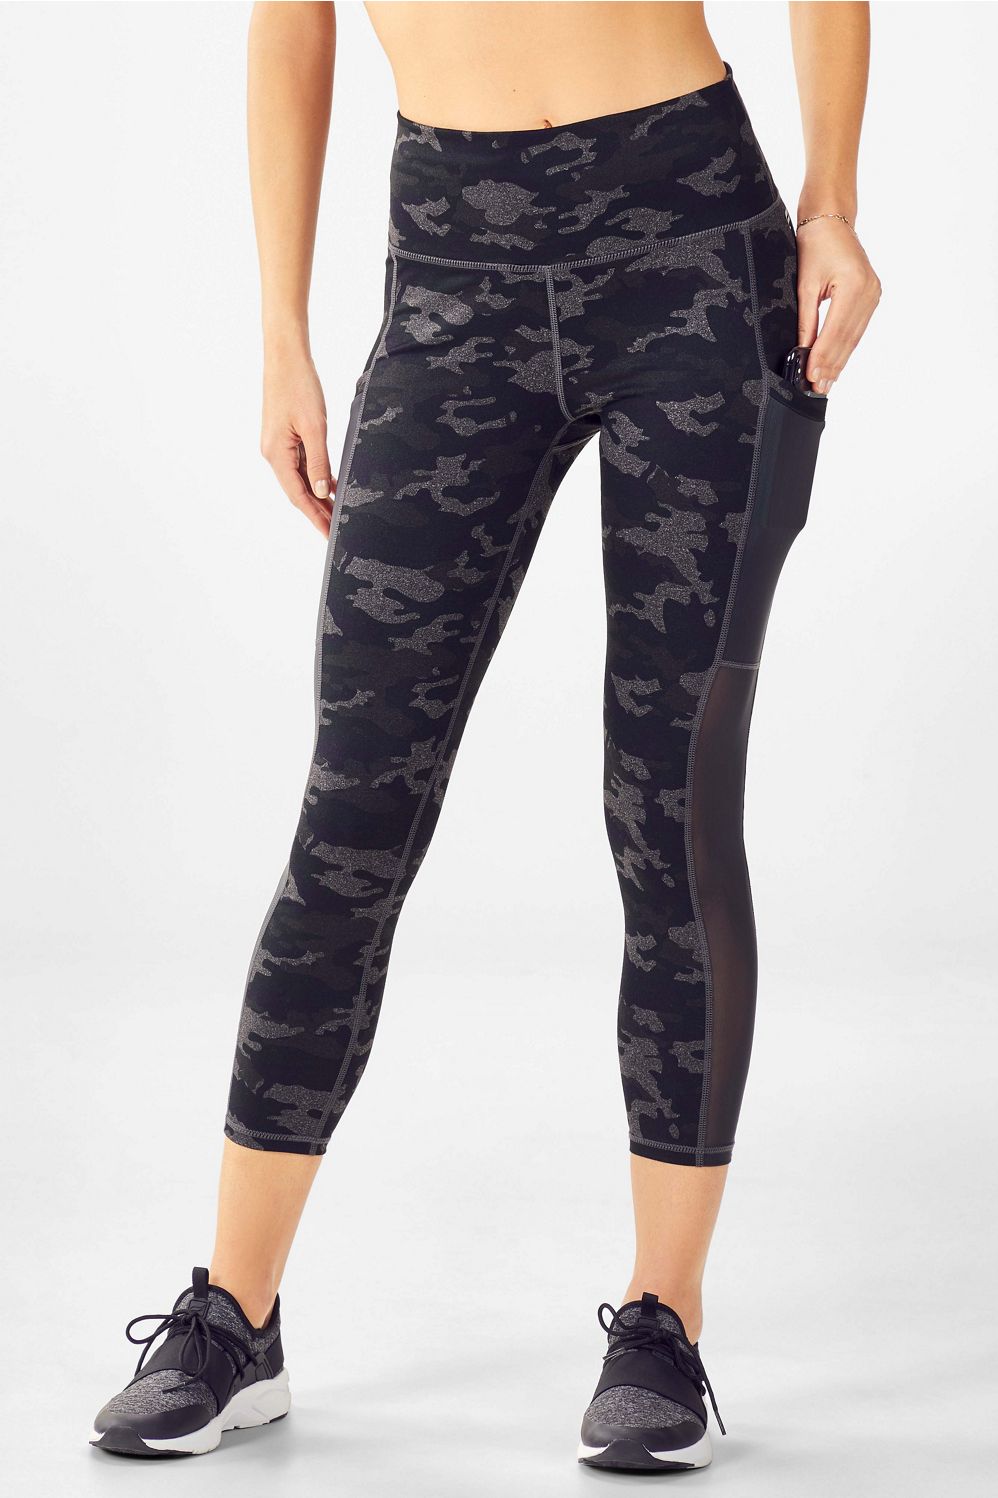 Fabletics Camouflage Athletic Leggings for Women